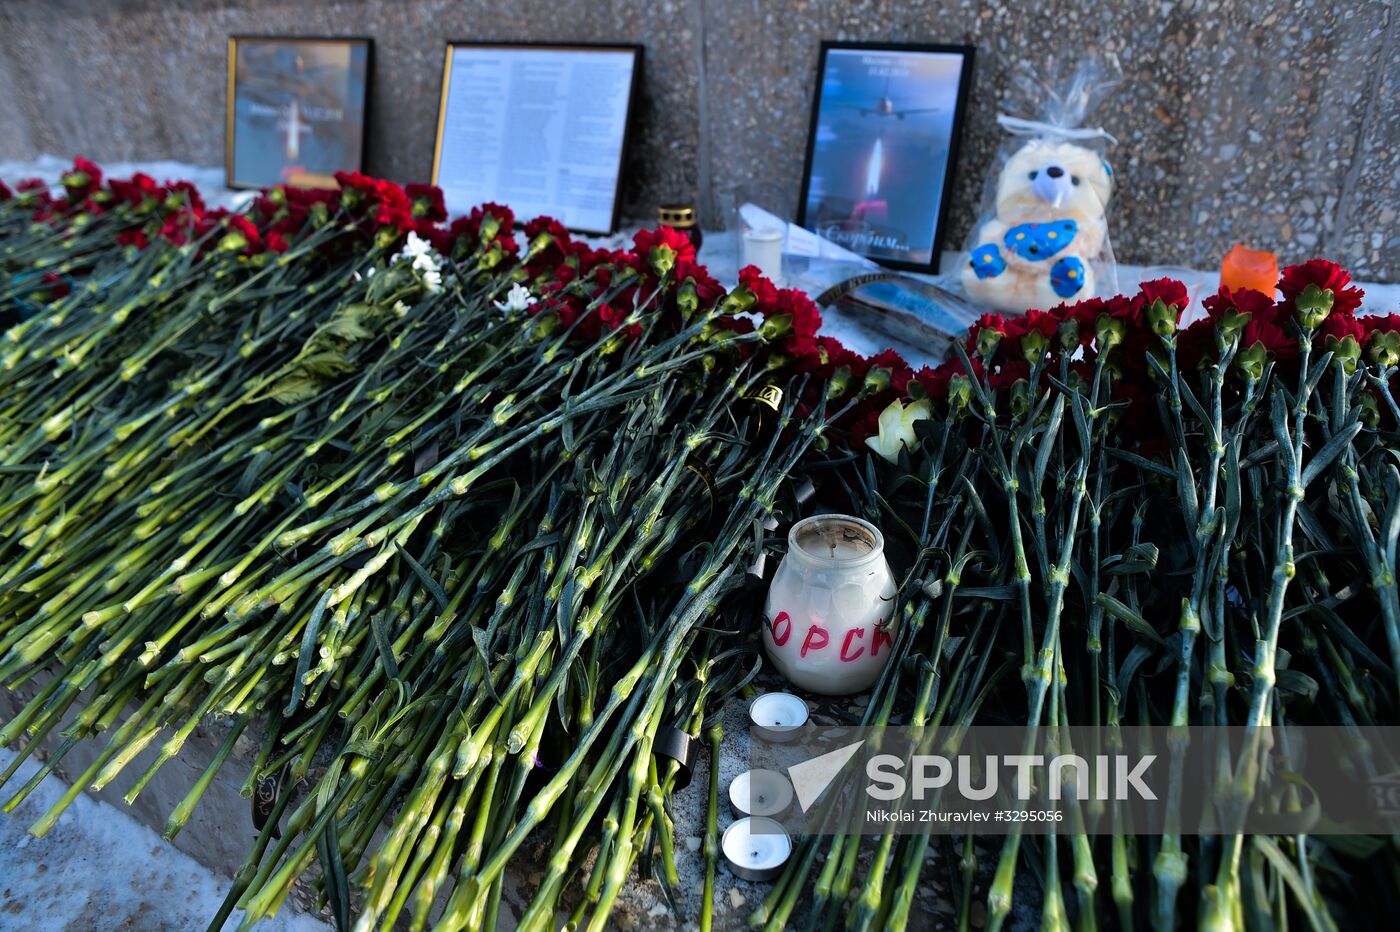 Residents of Orenburg bring flowers at Valery Chkalov monument to mourn An-148 crash victims